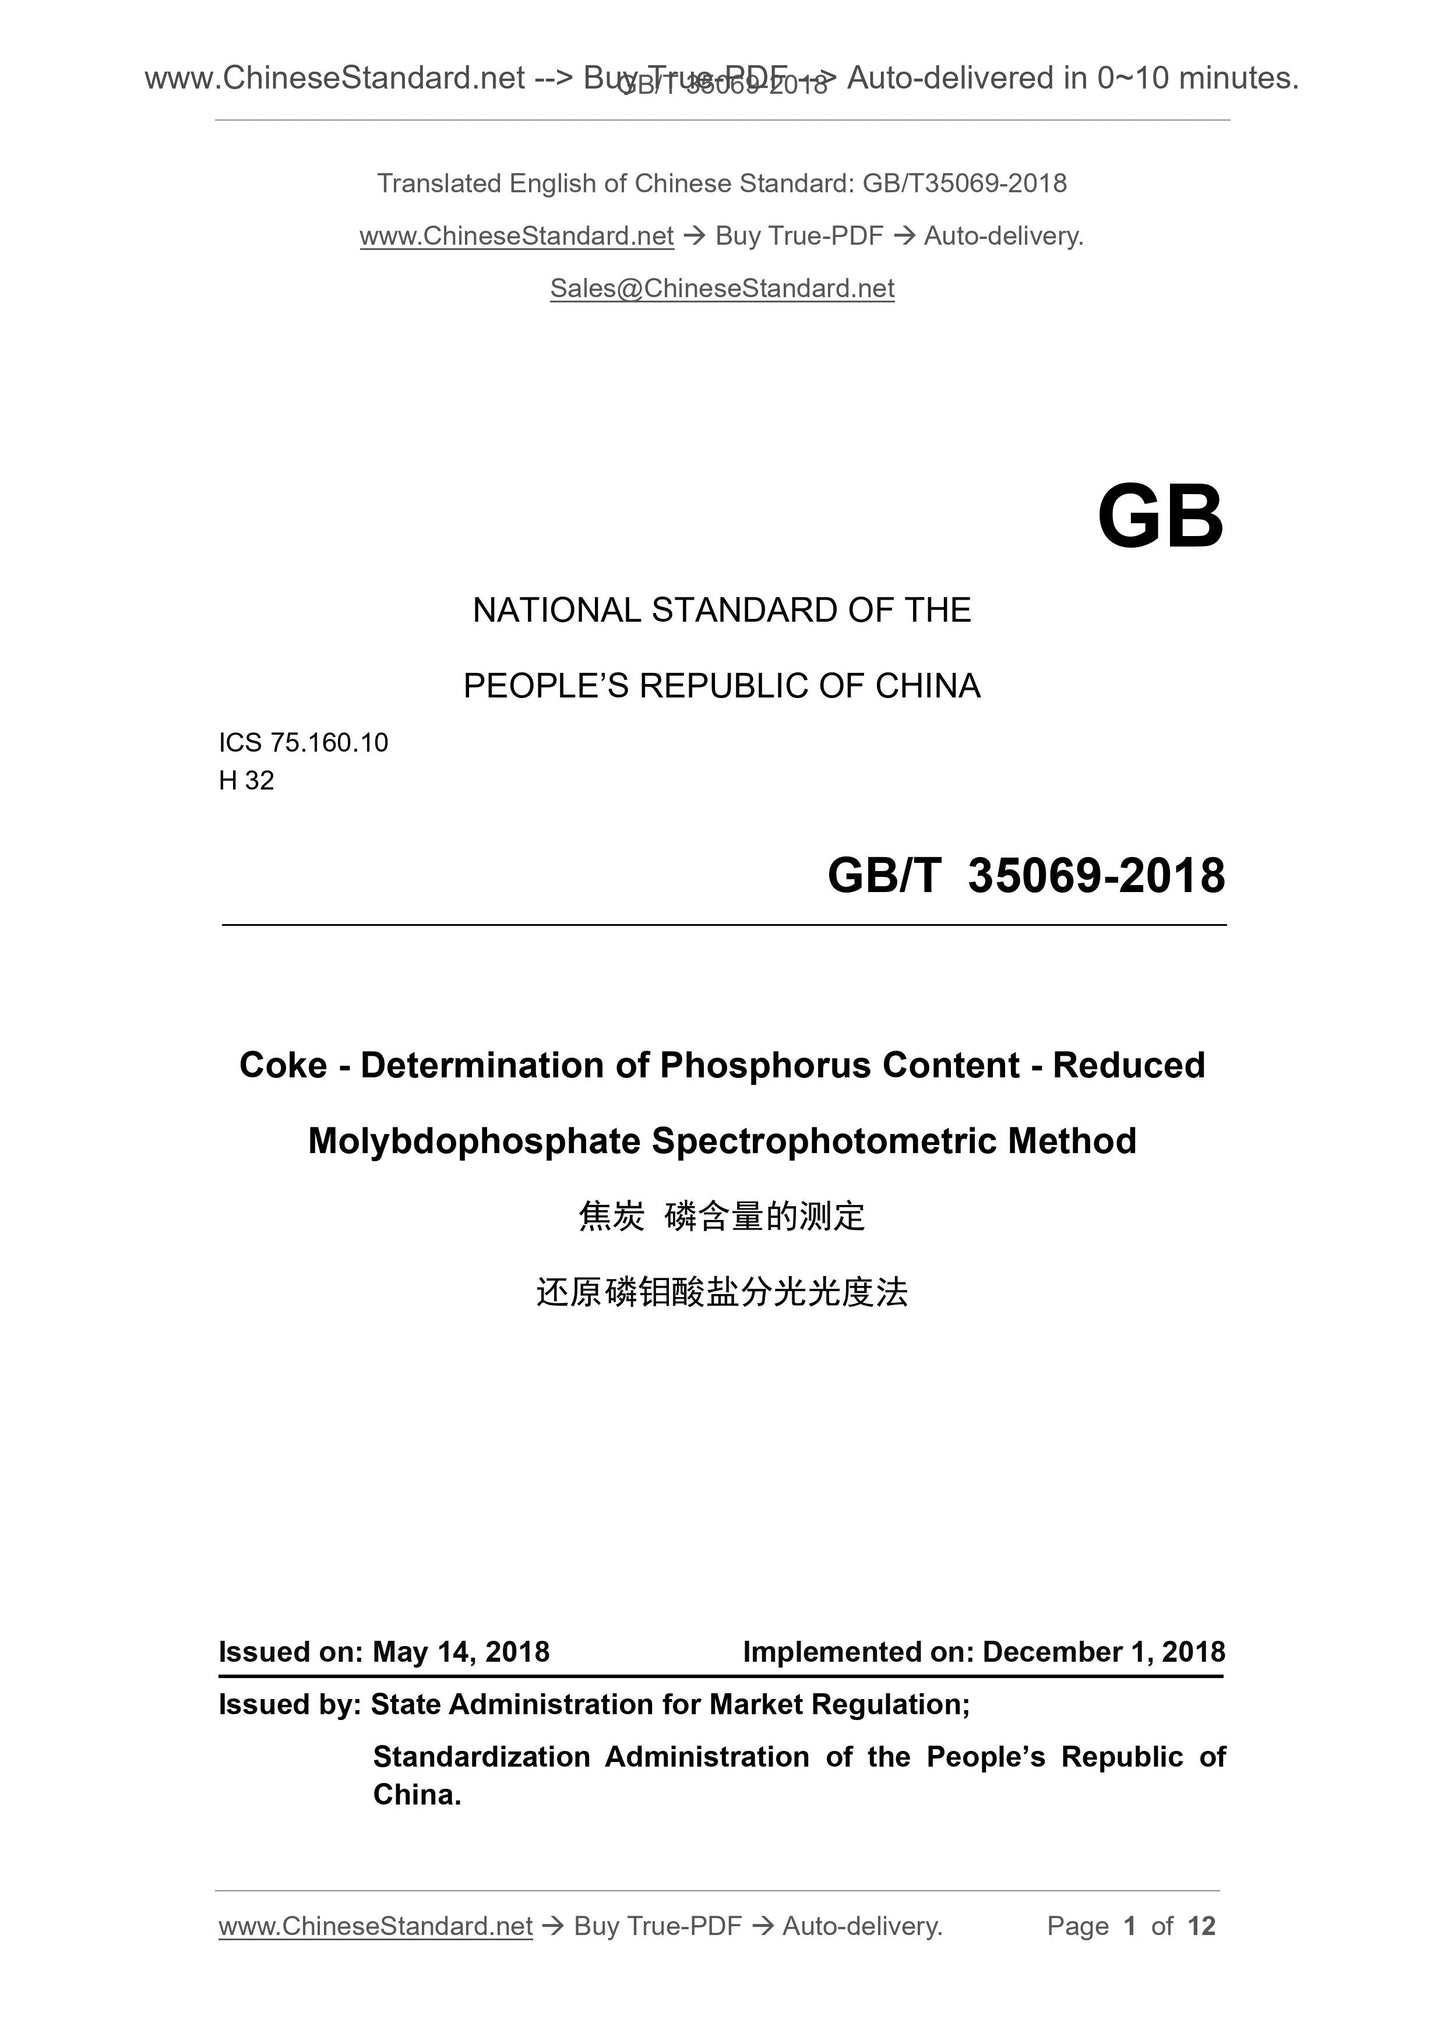 GB/T 35069-2018 Page 1